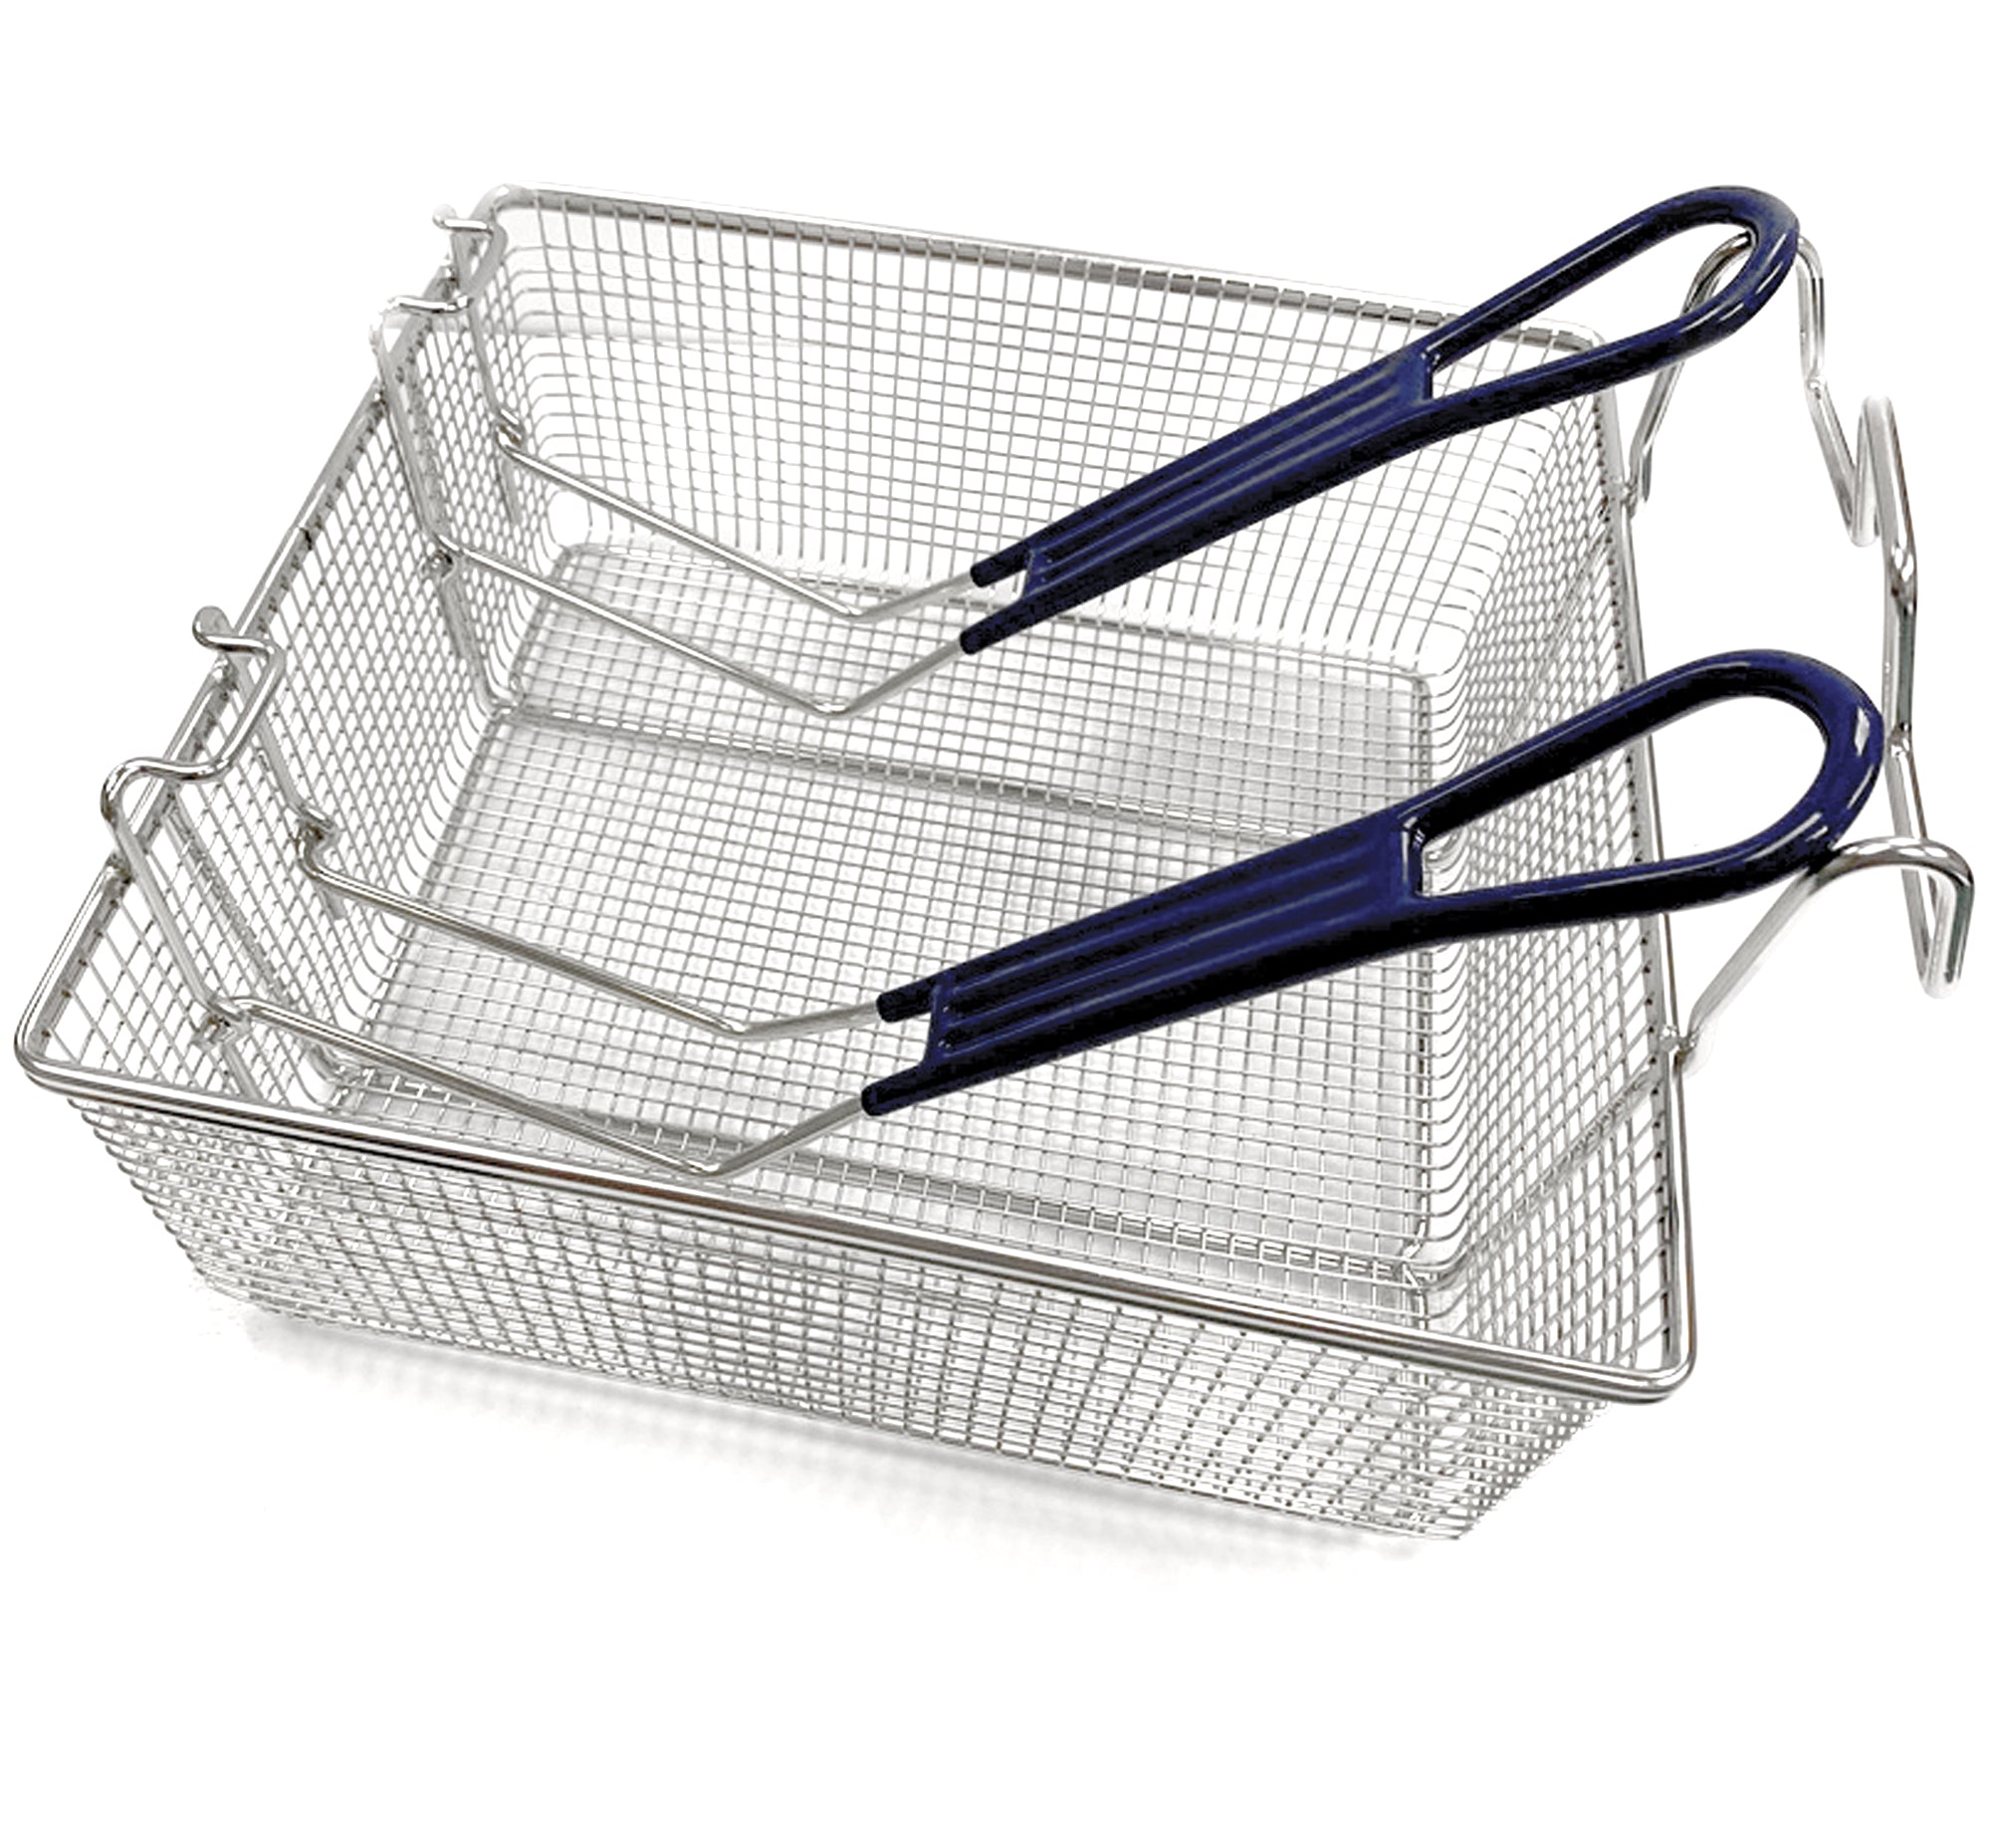 Double Stainless Mesh Basket